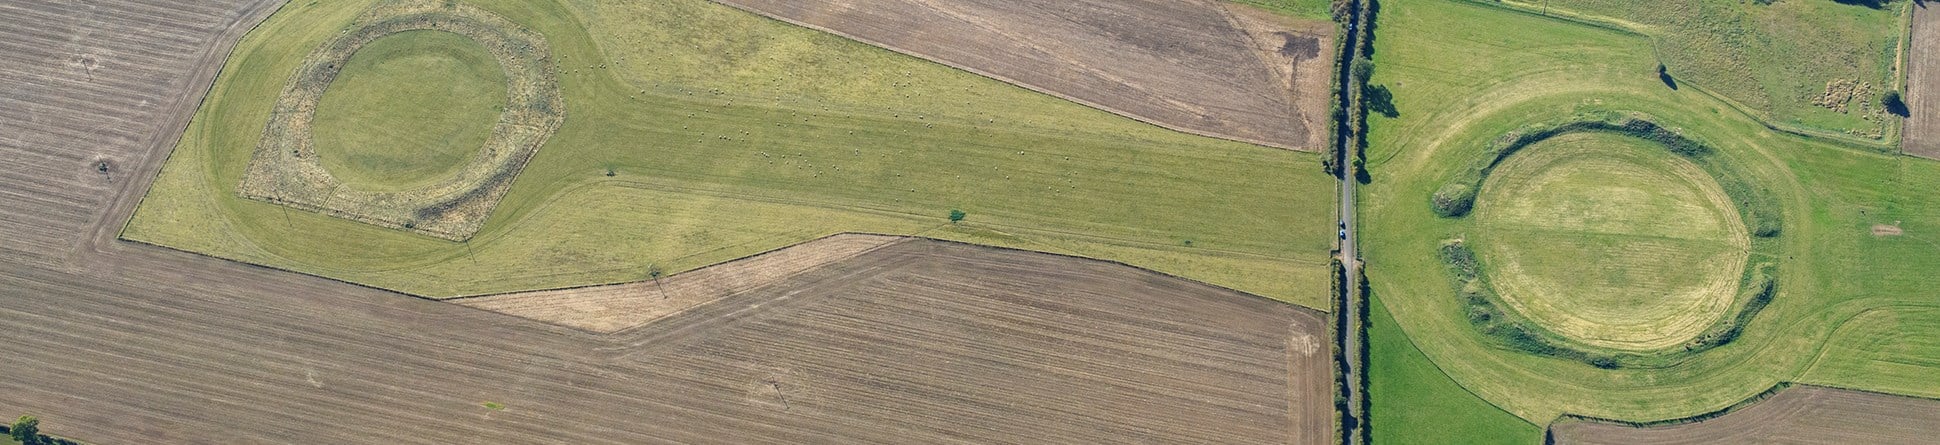 Aerial view of circular henge monuments in fields.